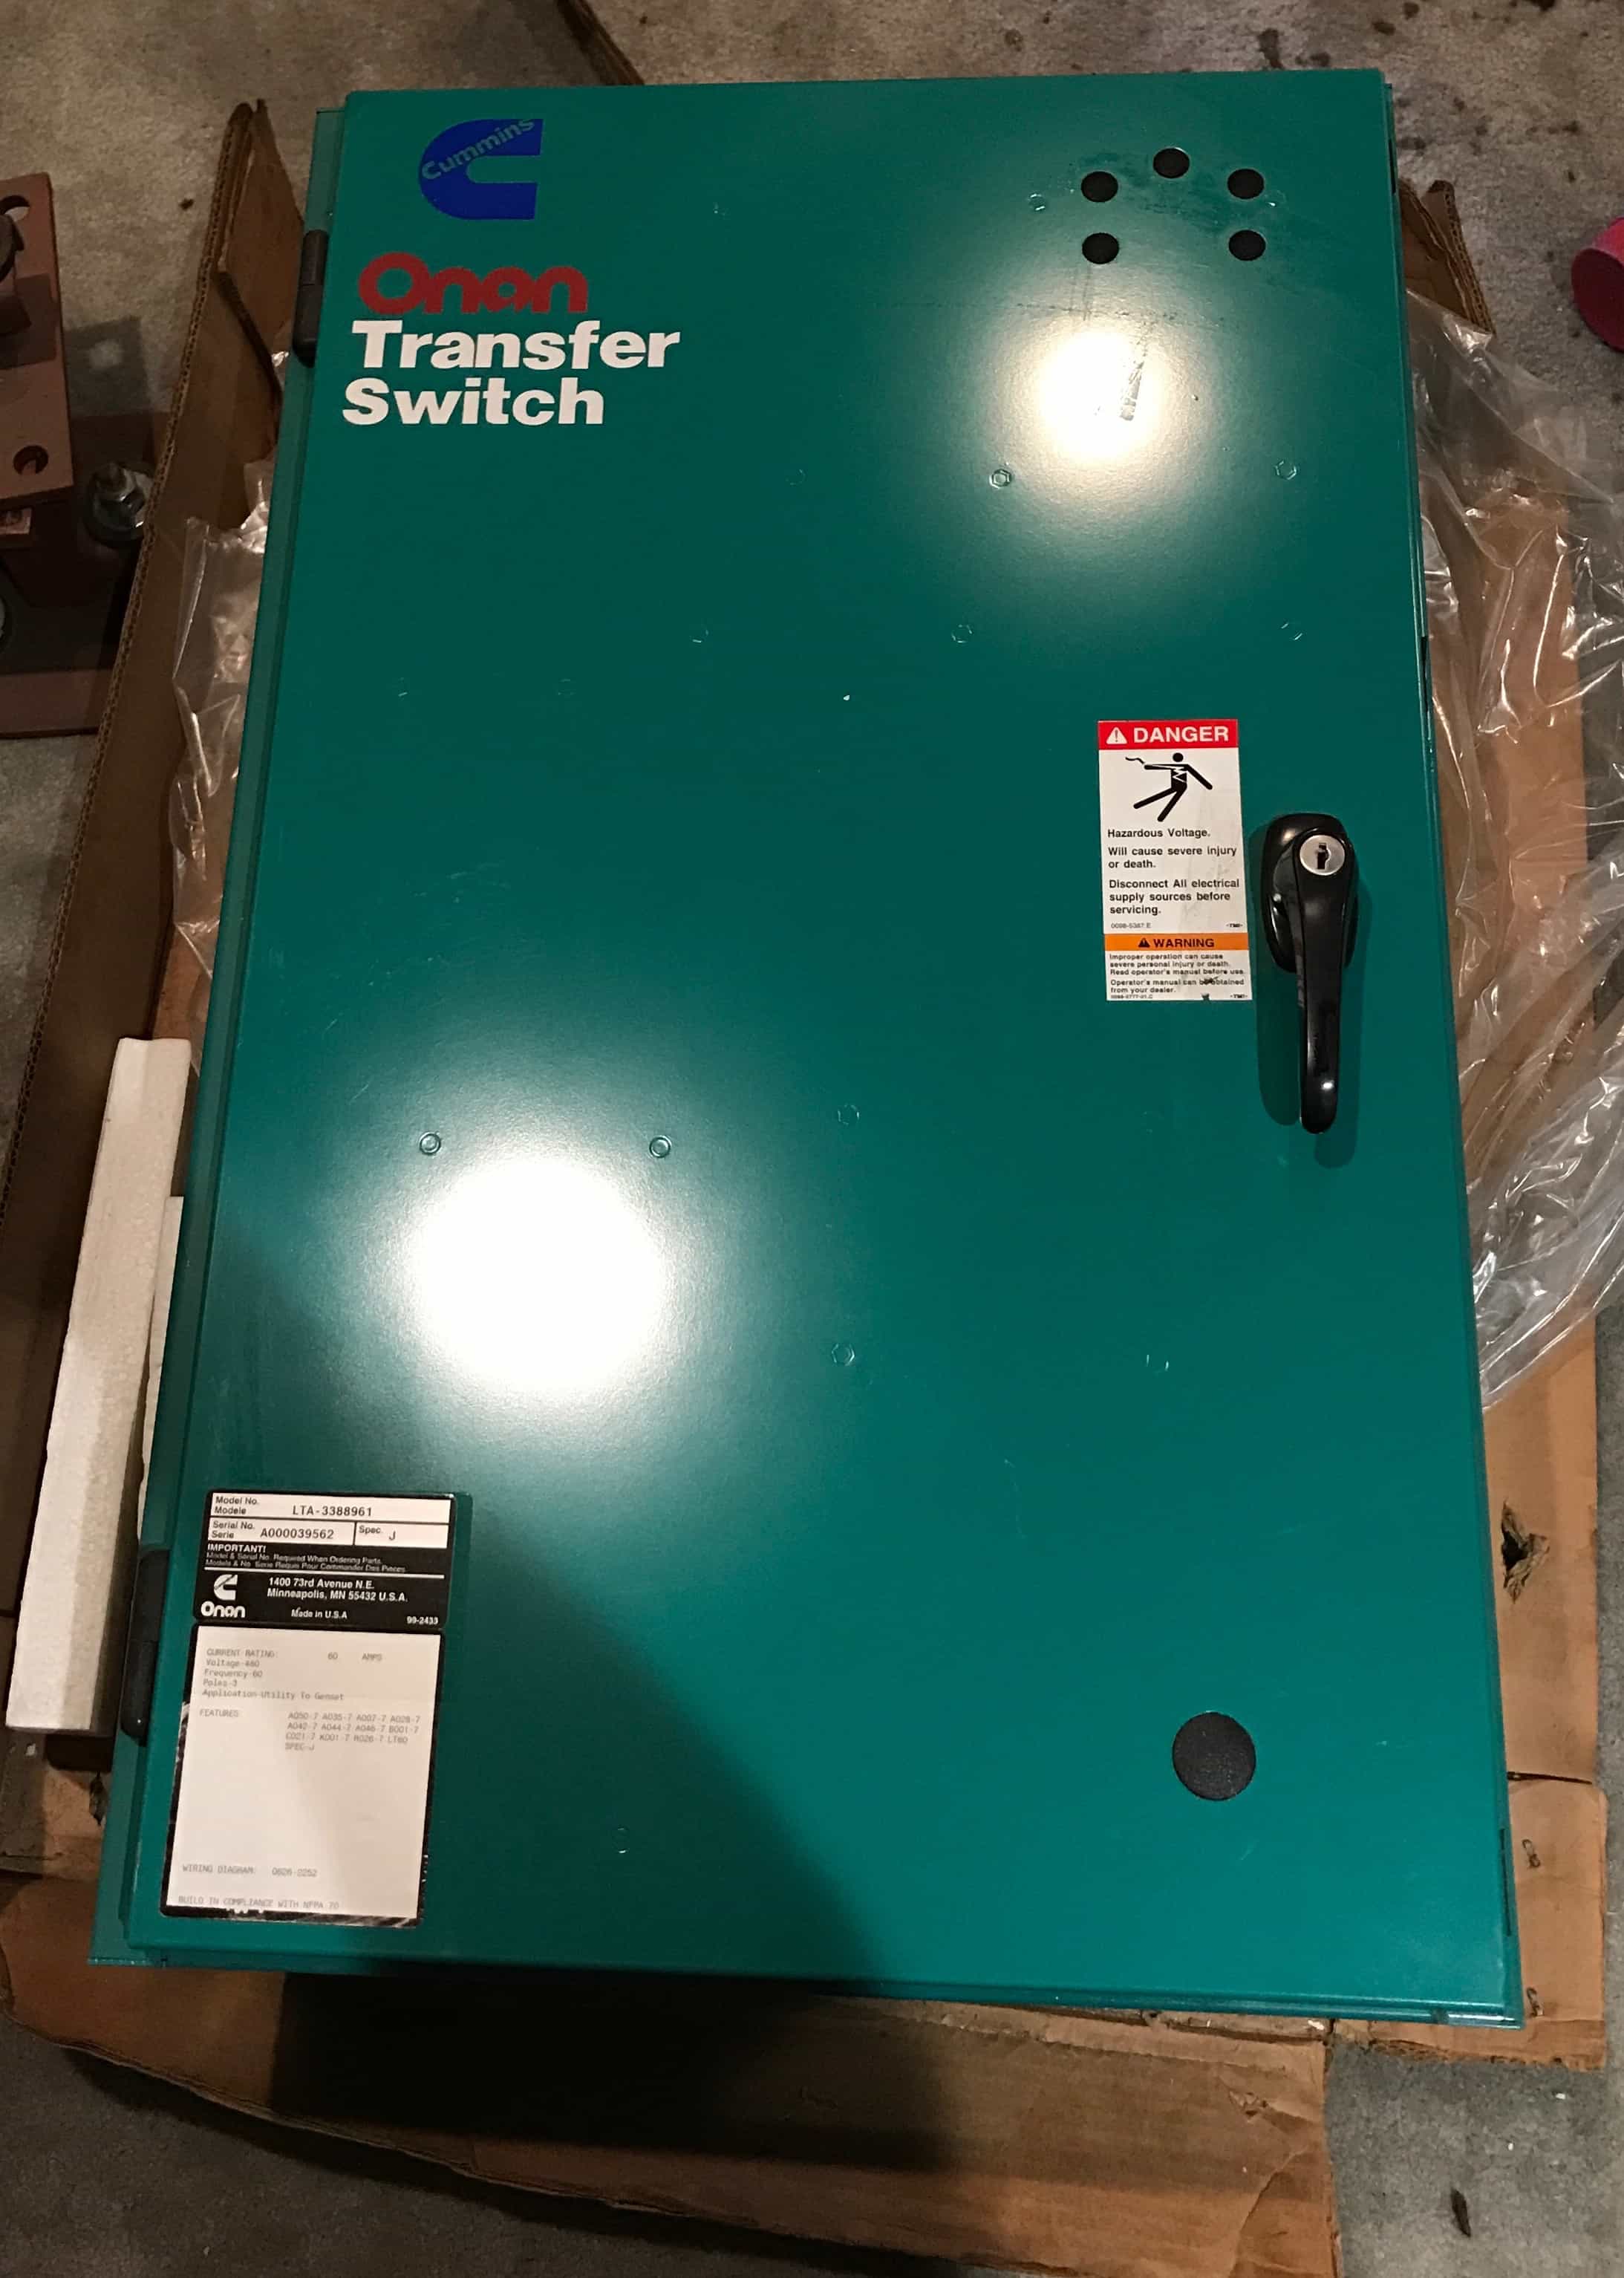 Cummins 100 Amp RSS100 Single-Phase Automatic Transfer Switch